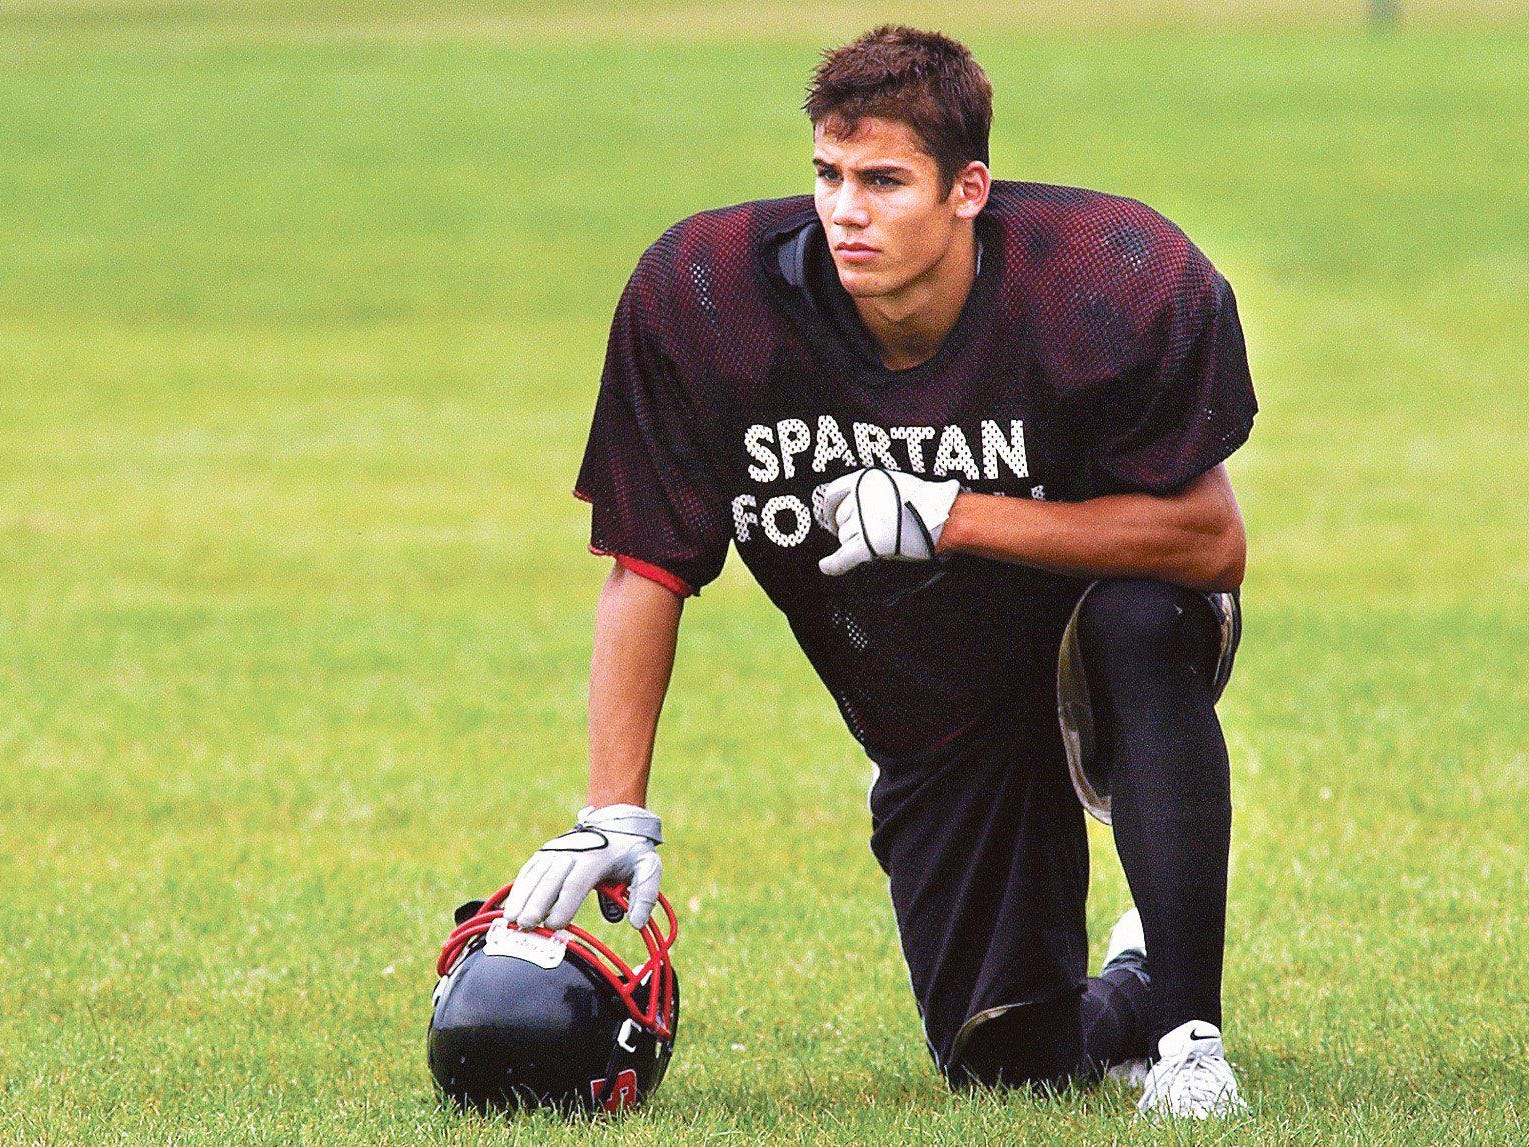 What college did Eric Decker attend?